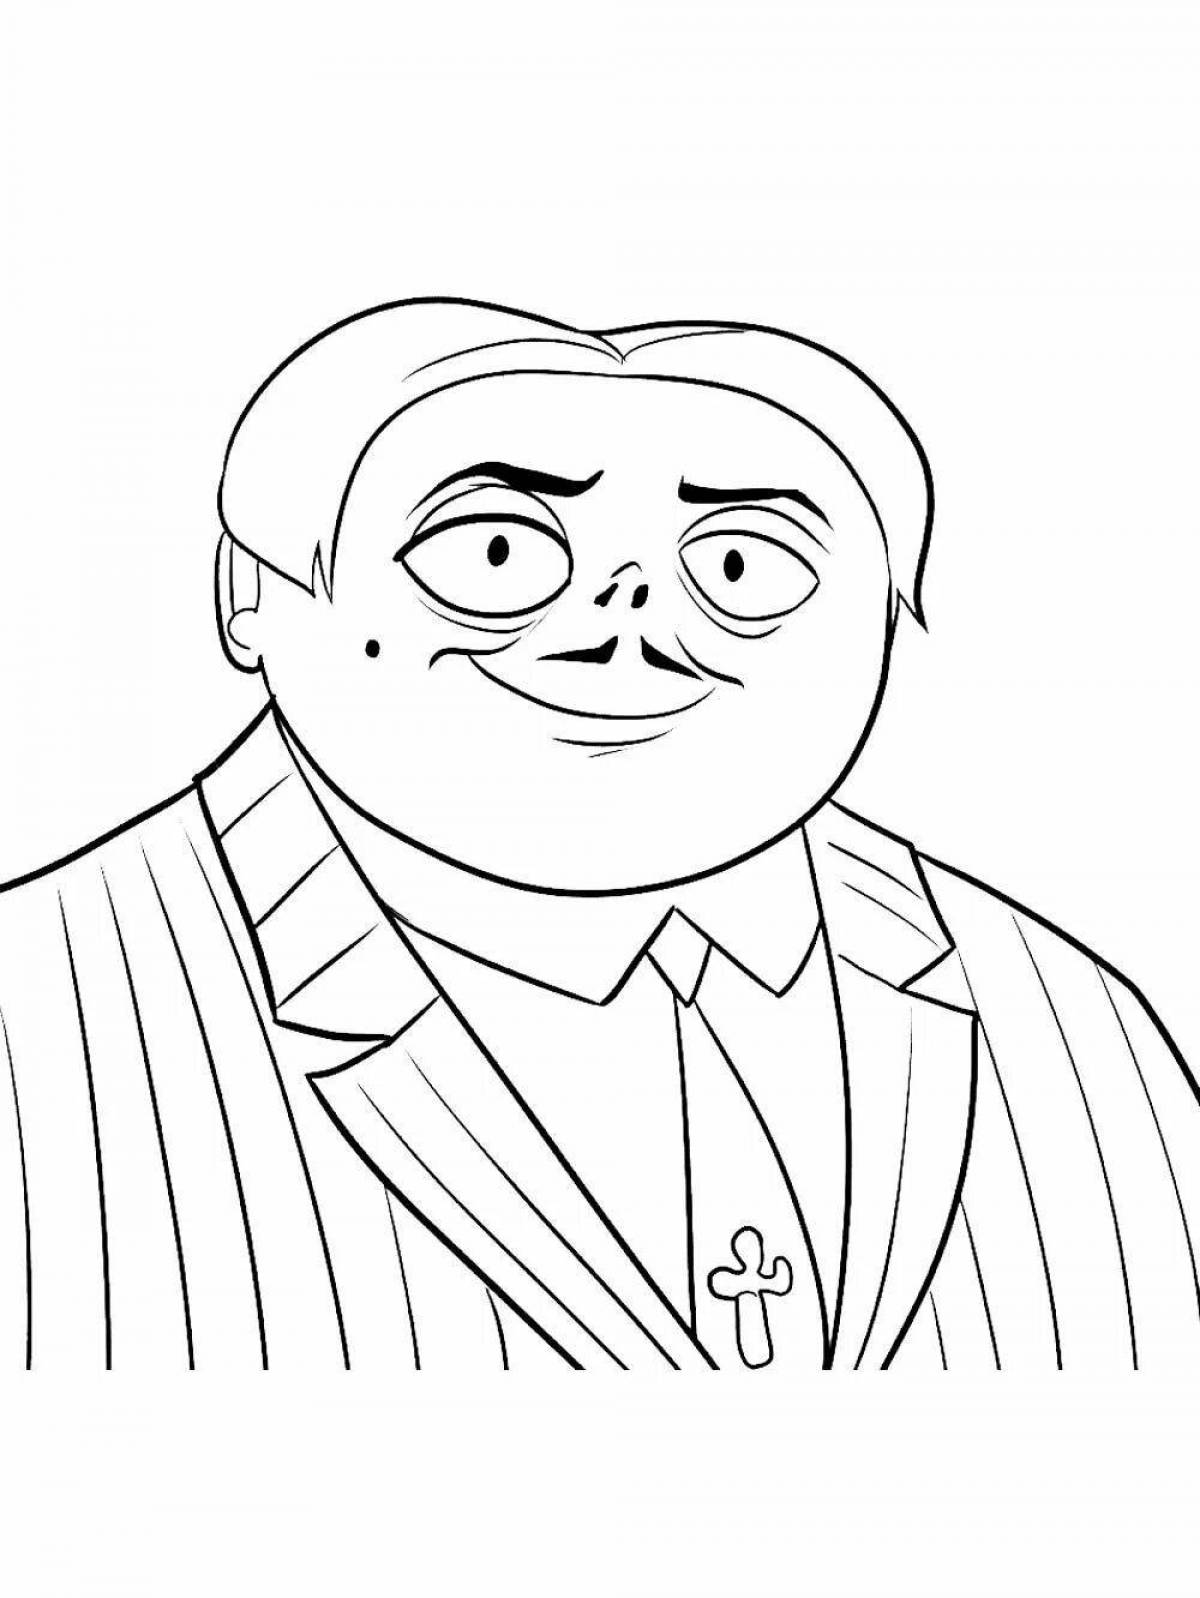 The Wonderful Addams Family coloring pages for kids